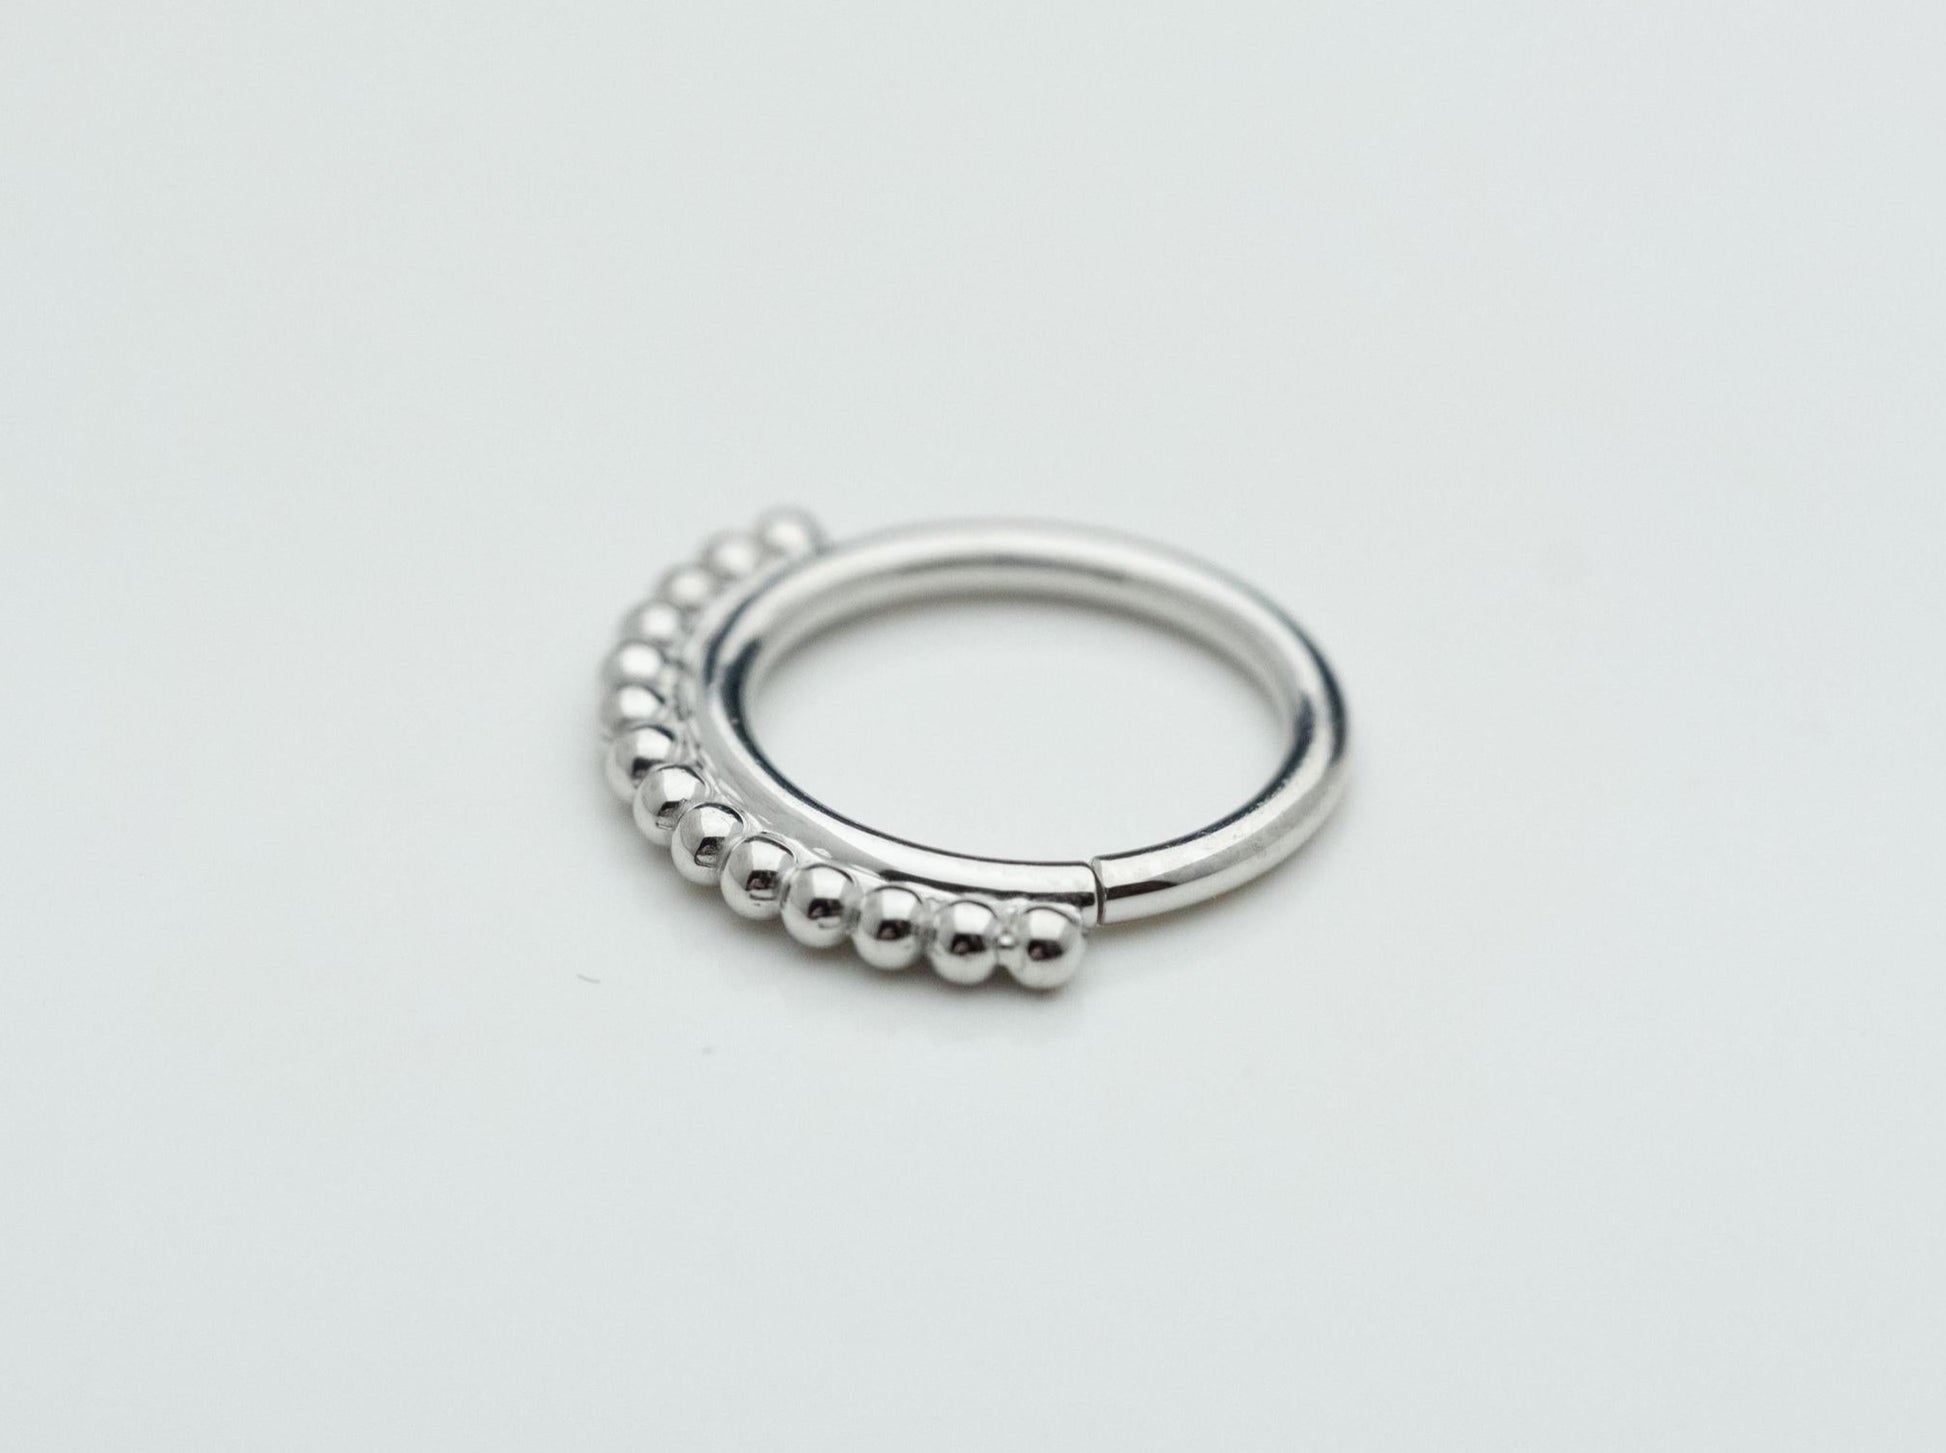 Latchmi Seam Ring in 14k White Gold by BVLA